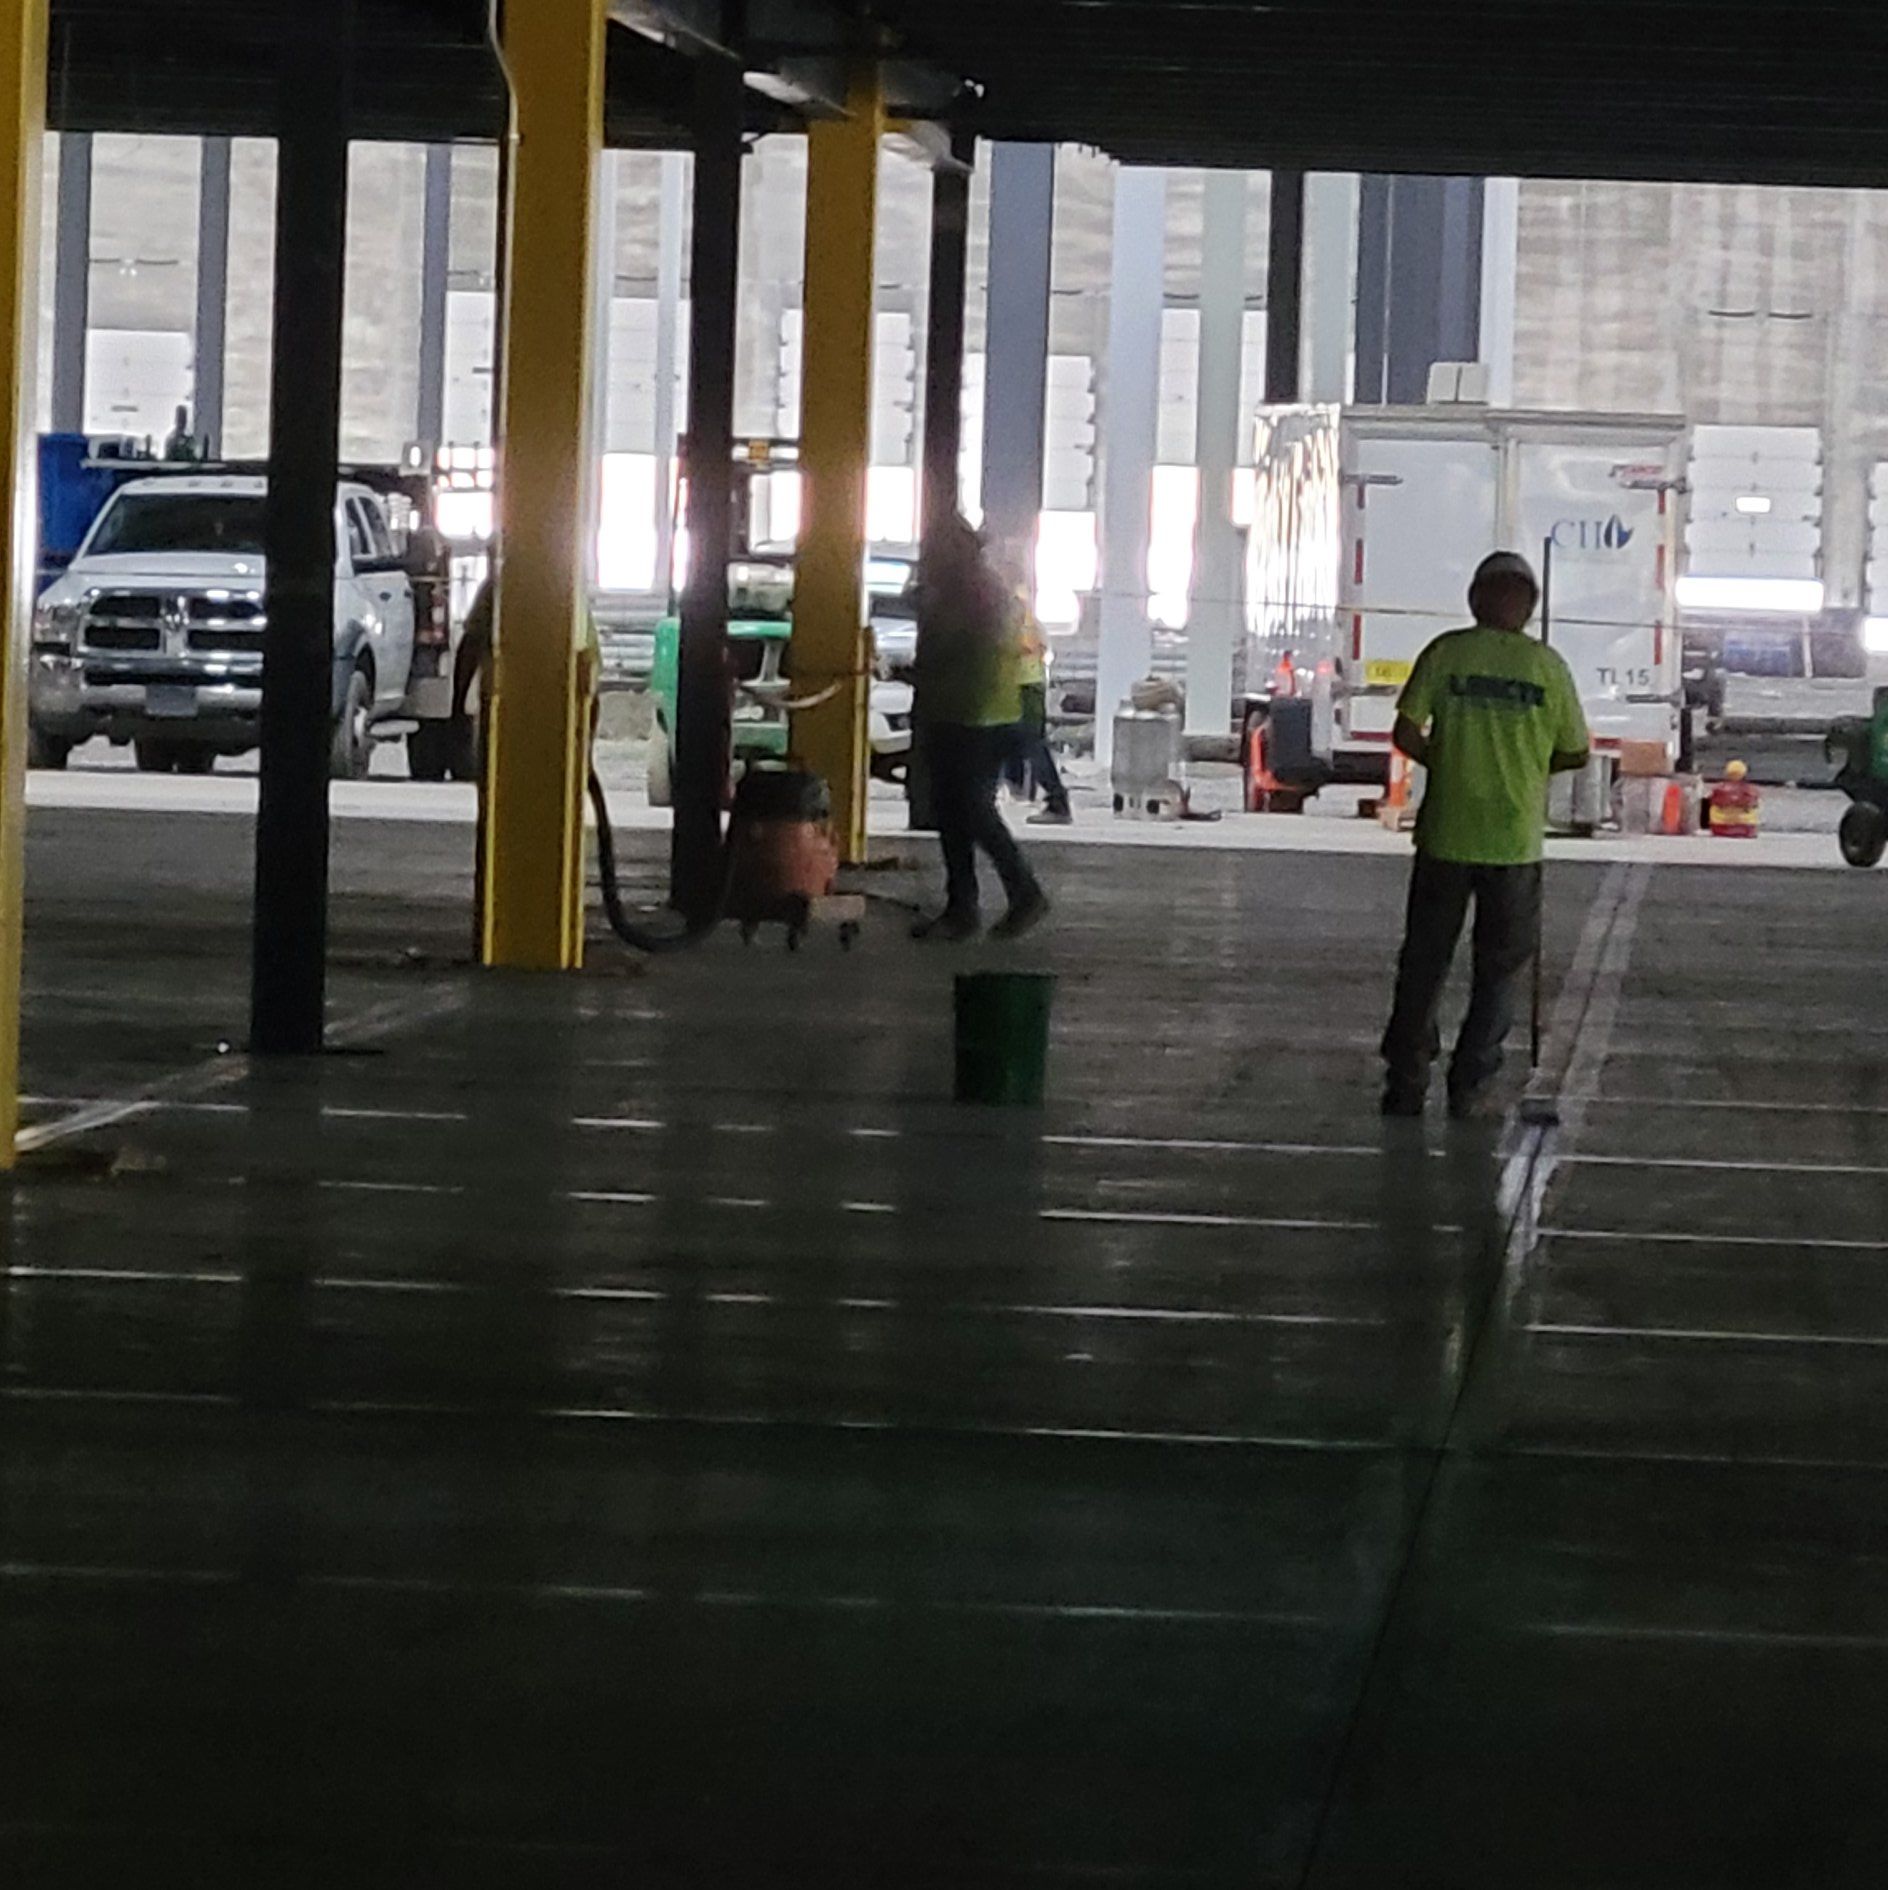 Ameriseal is cleaning up the finishing sand to complete the caulking job in this parking garage